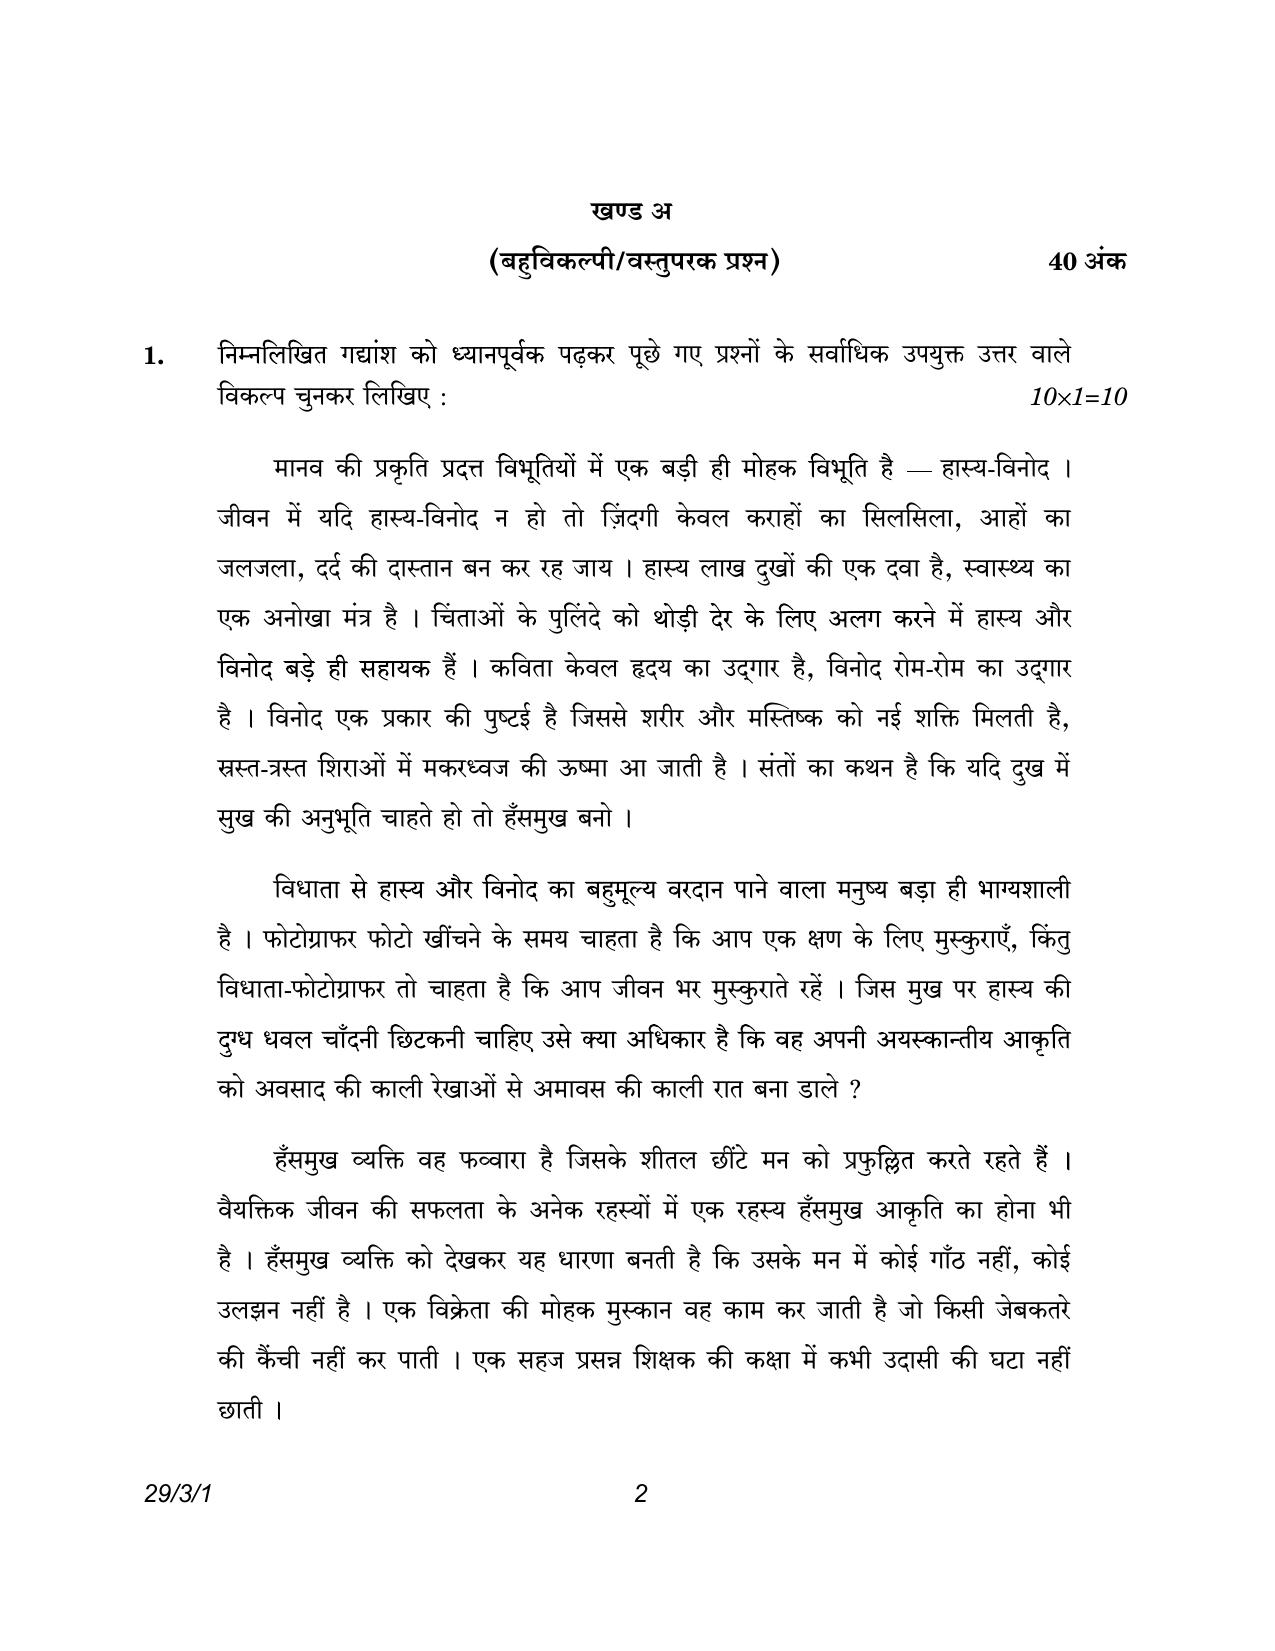 CBSE Class 12 29-3-1 Hindi Elective 2023 Question Paper - Page 2